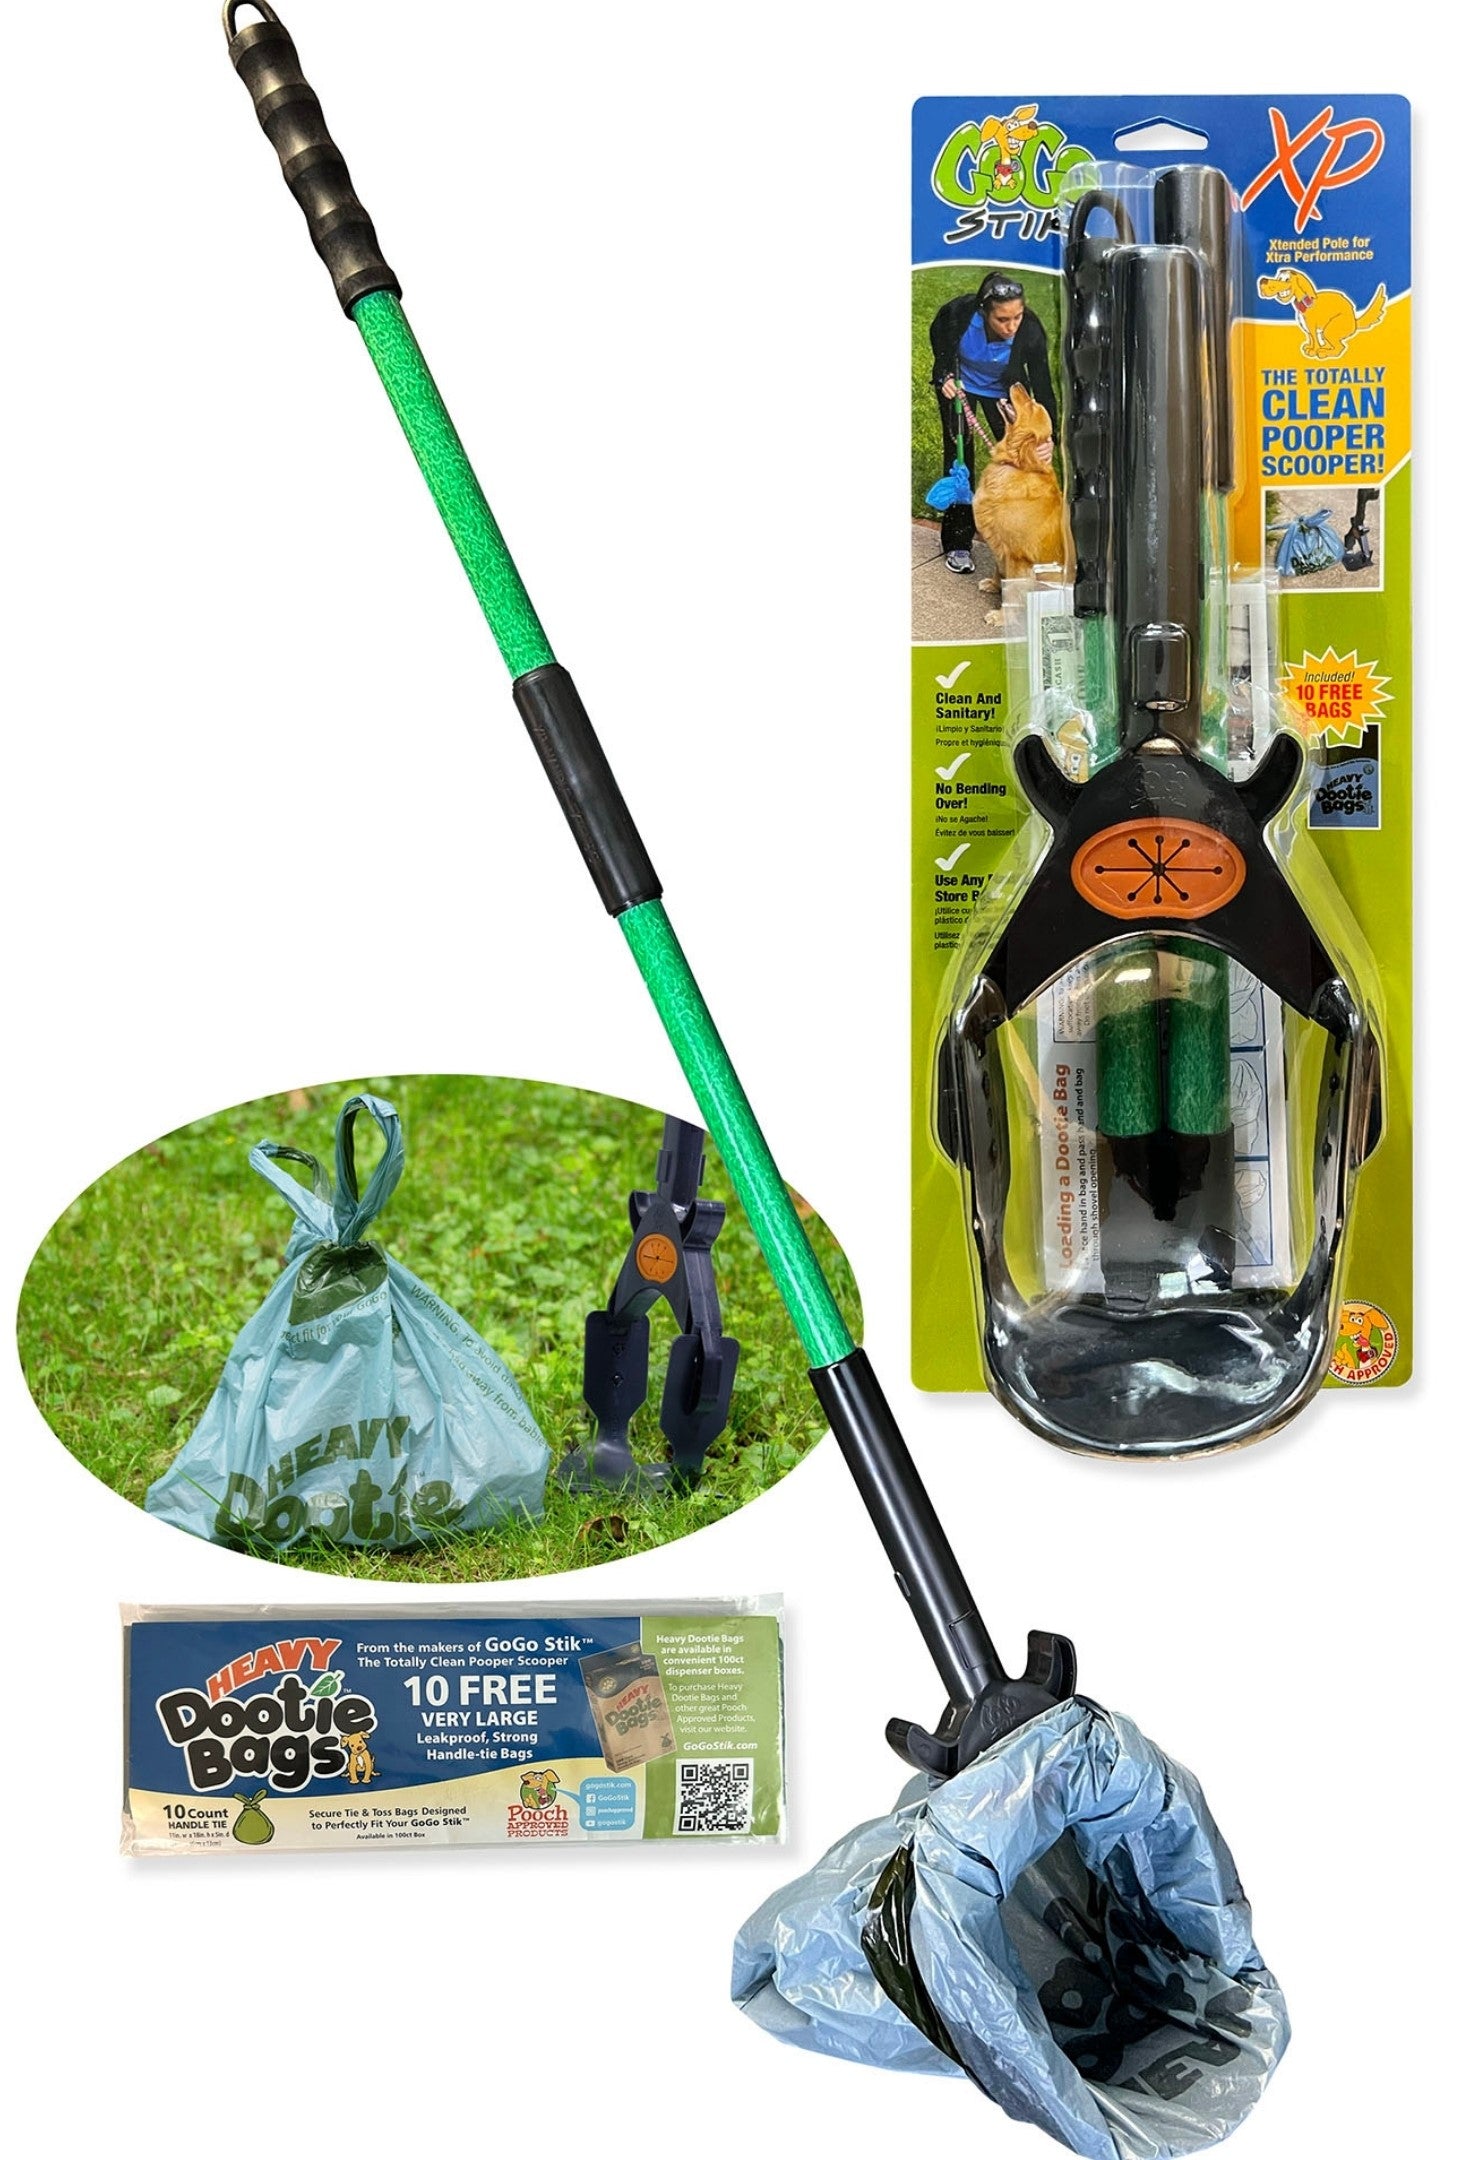 Or Scoop Set Combo Like rake 24 to 36 inch GoGo Stik ST or XP Model Scooper Use Store Bags Dootie Bags. The Totally Clean Pooper Scooper Small to Large Dogs Optional EZ Wedge 